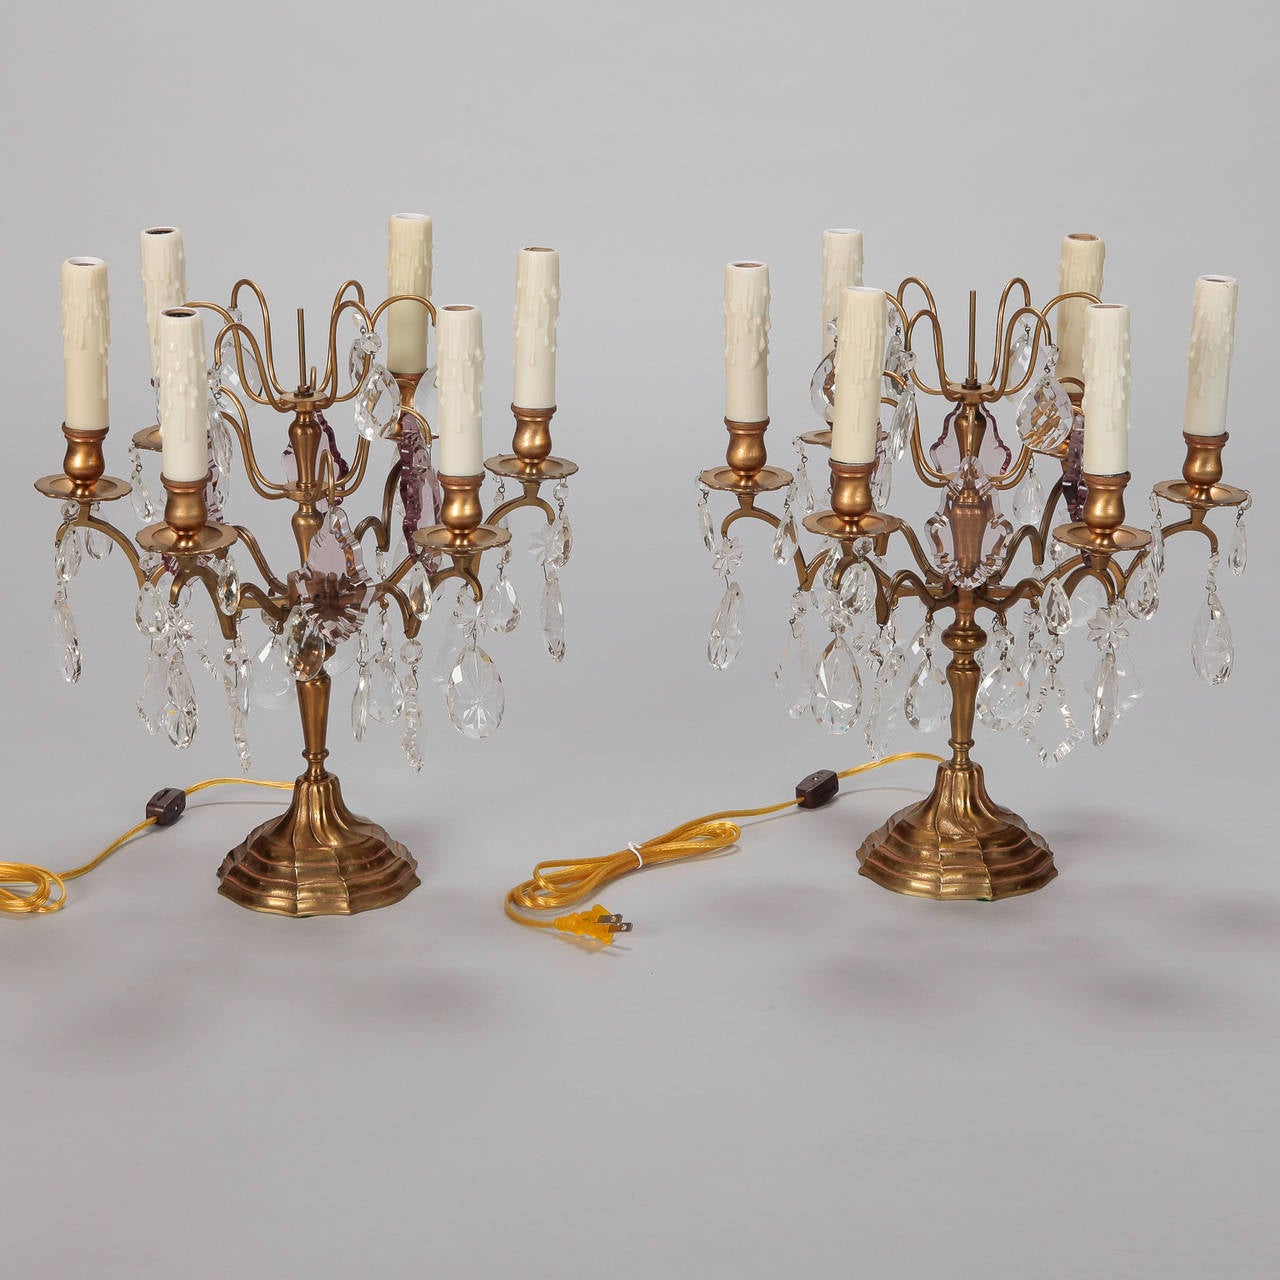 Circa 1900 French six arm candelabra in bronze with large clear and amethyst crystal drops. Electrified for use as table lamps and updated for US electrical standards. Sold and priced as a pair.